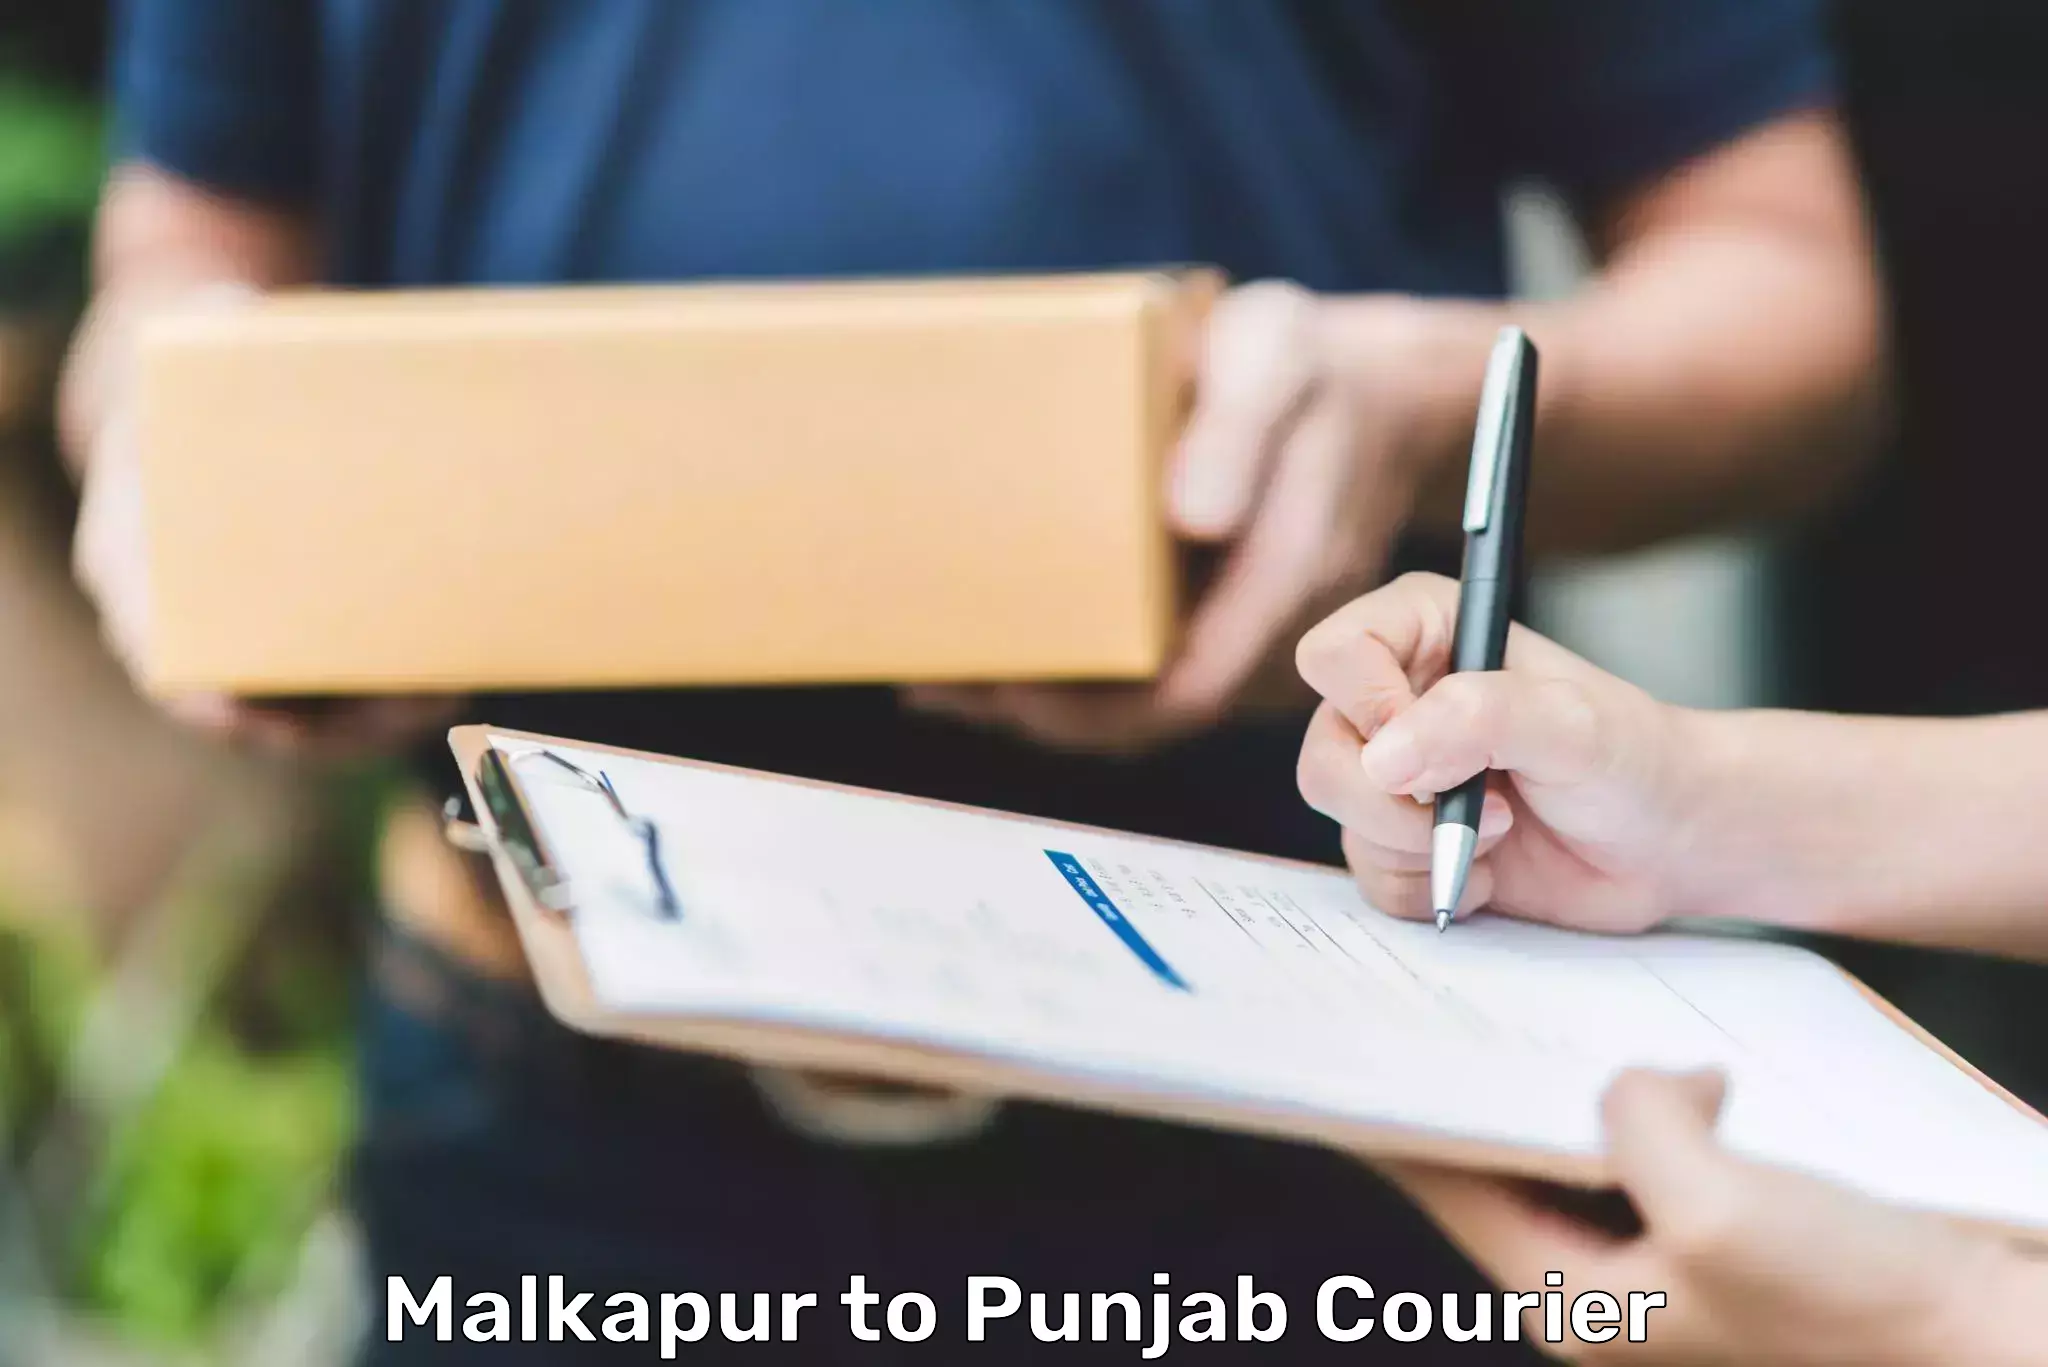 Courier service innovation Malkapur to Phillaur